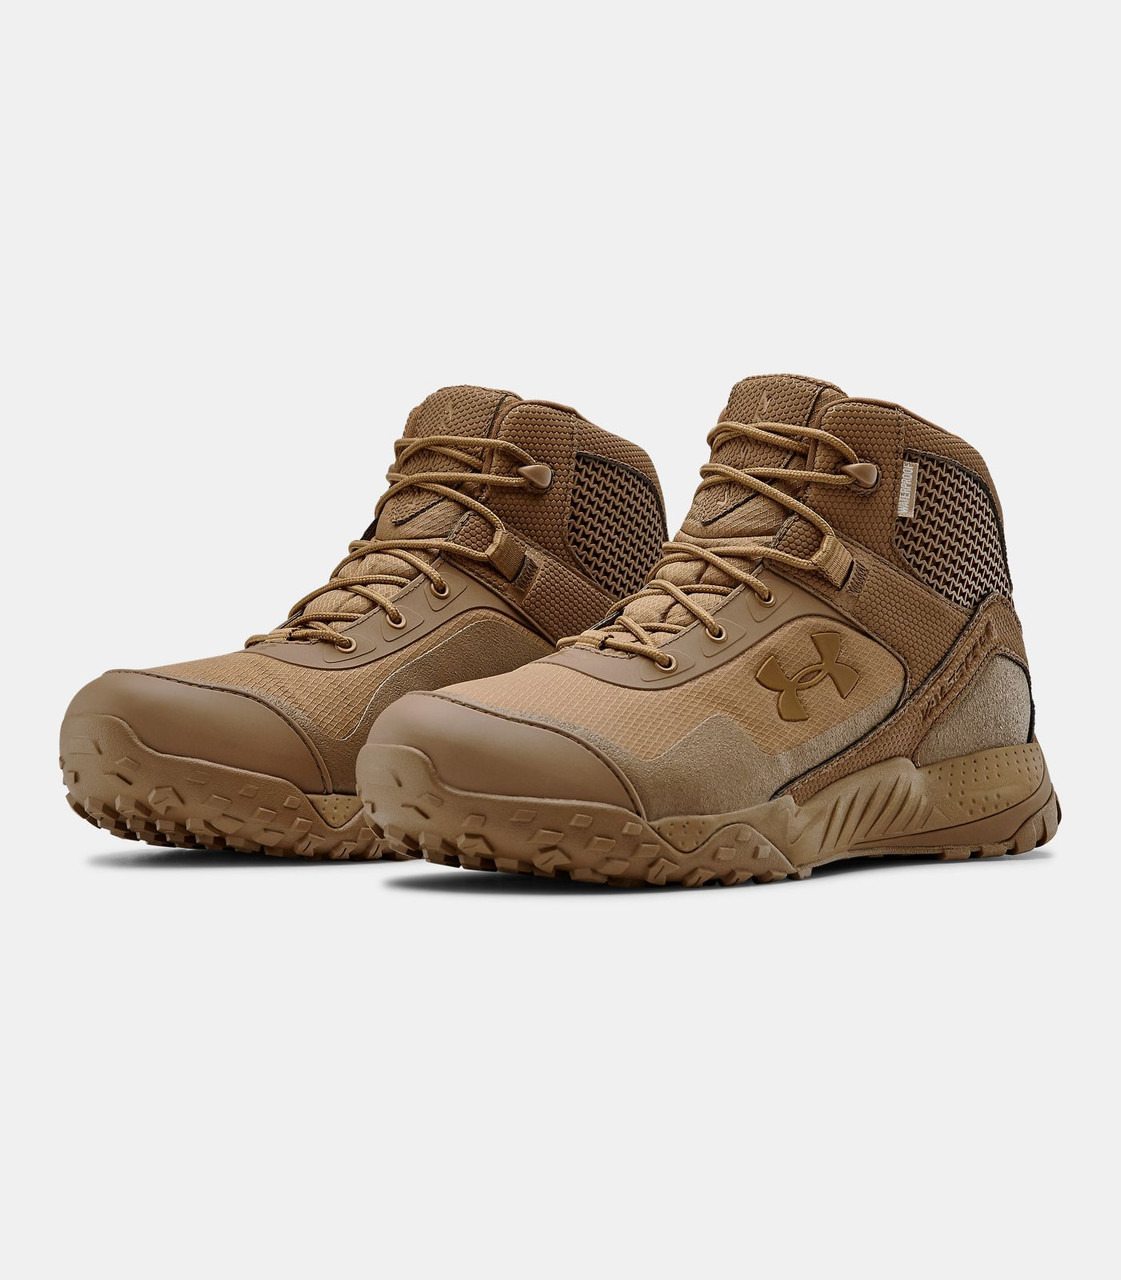 under armour tactical boots brown